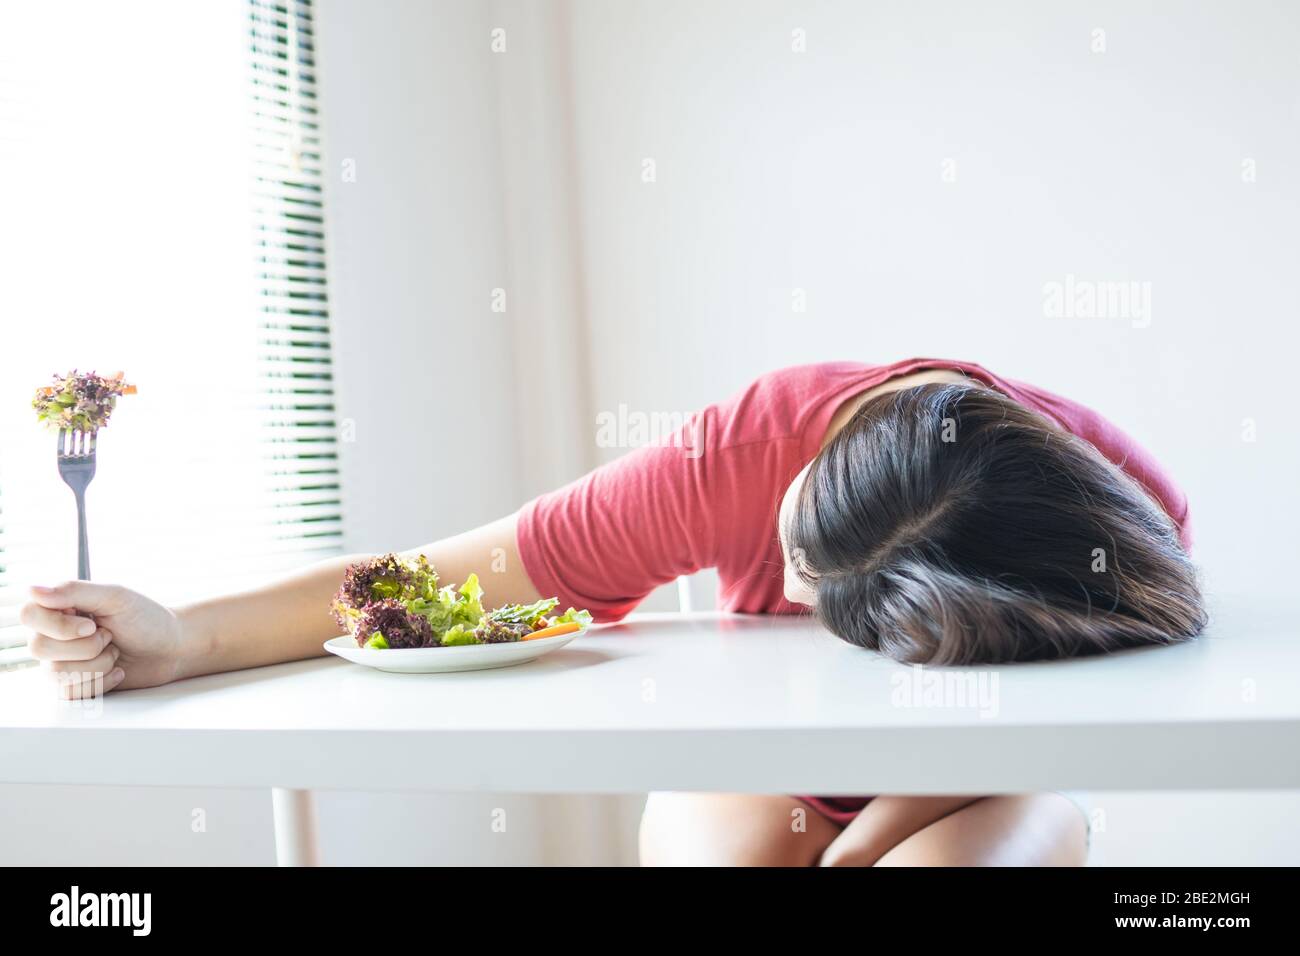 Unhappy woman bored vegetable, girl is on diet and laying down and  crouching on eating table Stock Photo